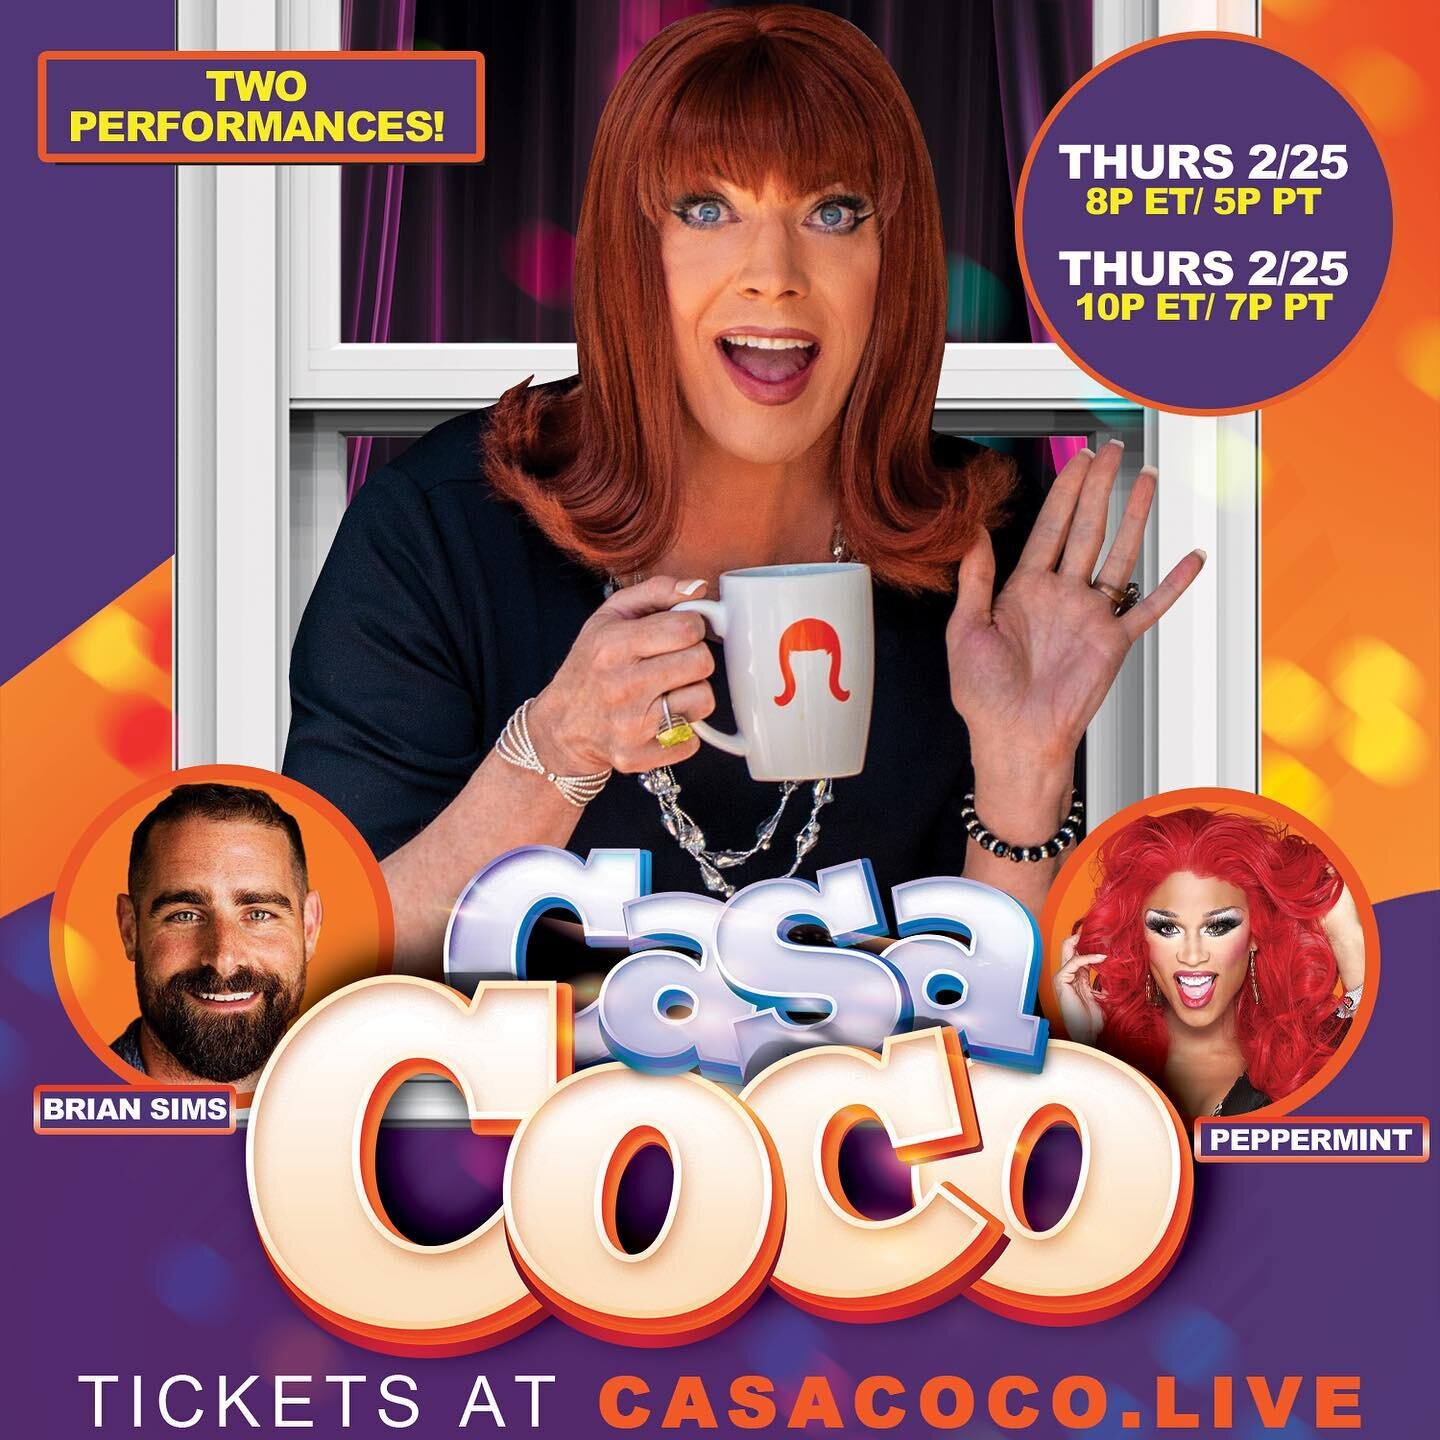 Tonight!! Get your tix at CasaCoco.live